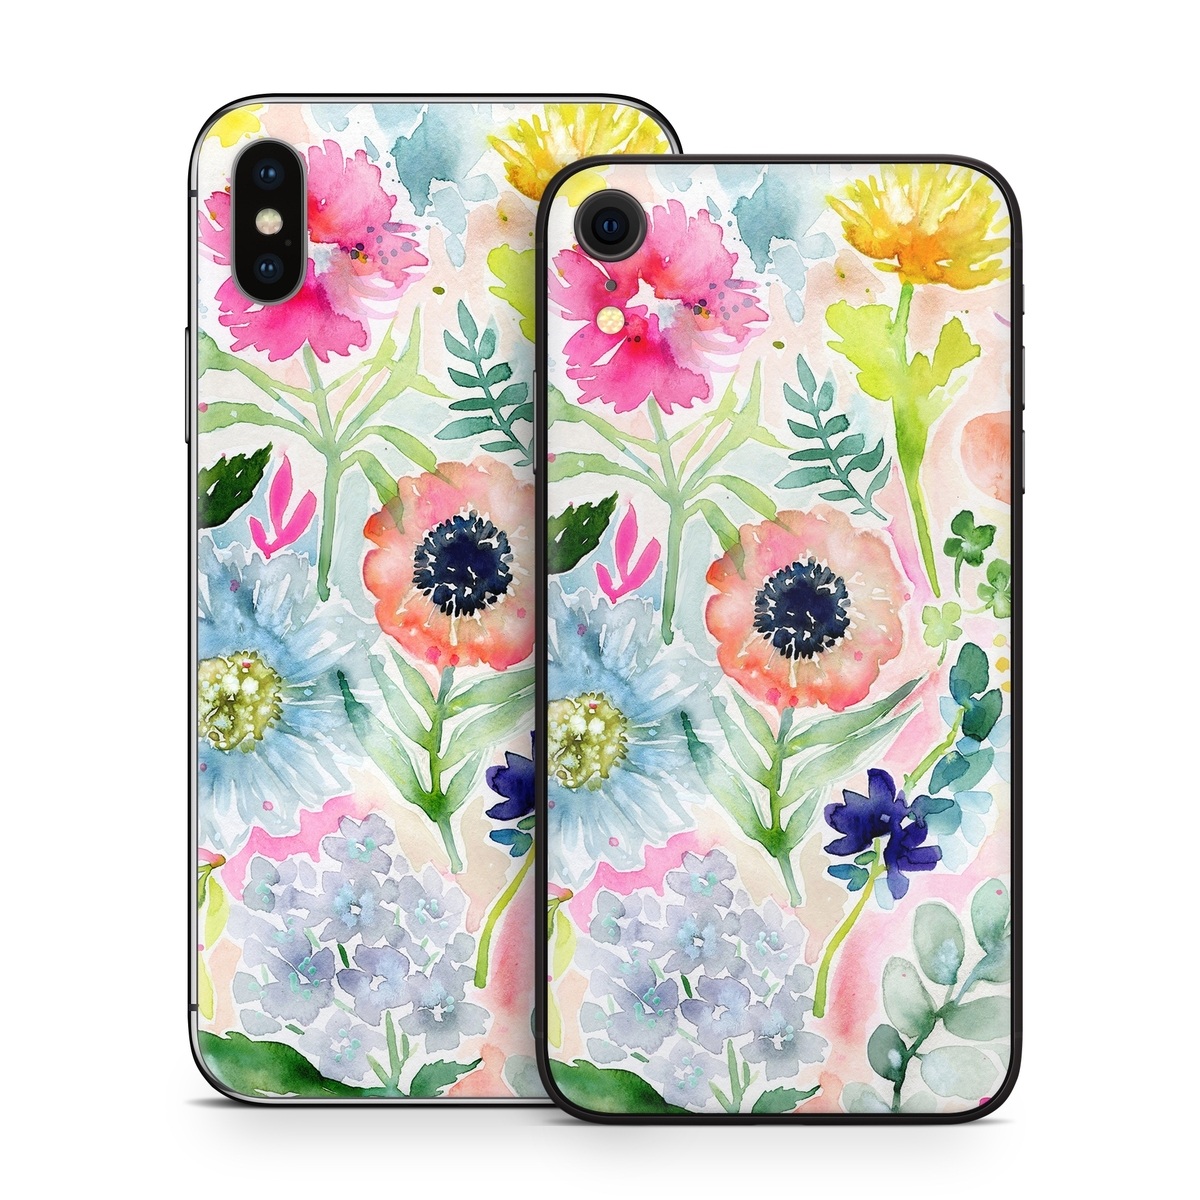 iPhone XS Skin design of Flower, Watercolor paint, Plant, Flowering plant, Pattern, Floral design, Botany, Petal, Wildflower, Design, with green, pink, yellow, orange, blue, red, purple colors